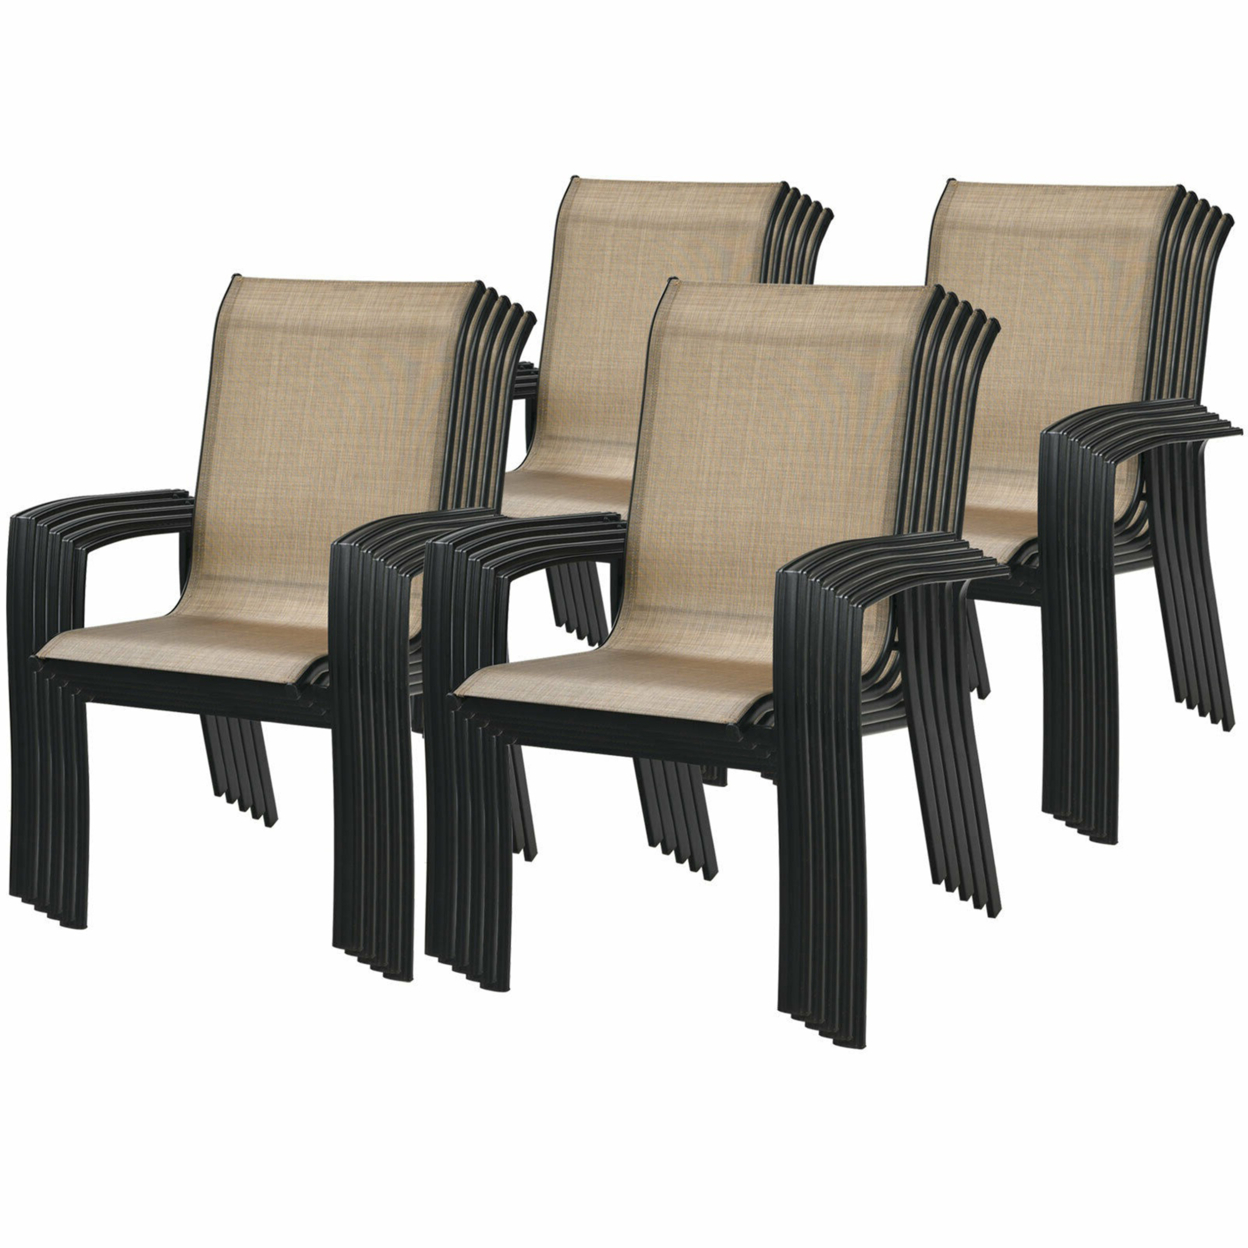 Outdoor Stackable Dining Chair Patio Armchair W/ Breathable Fabric - Brown, 20 Pcs